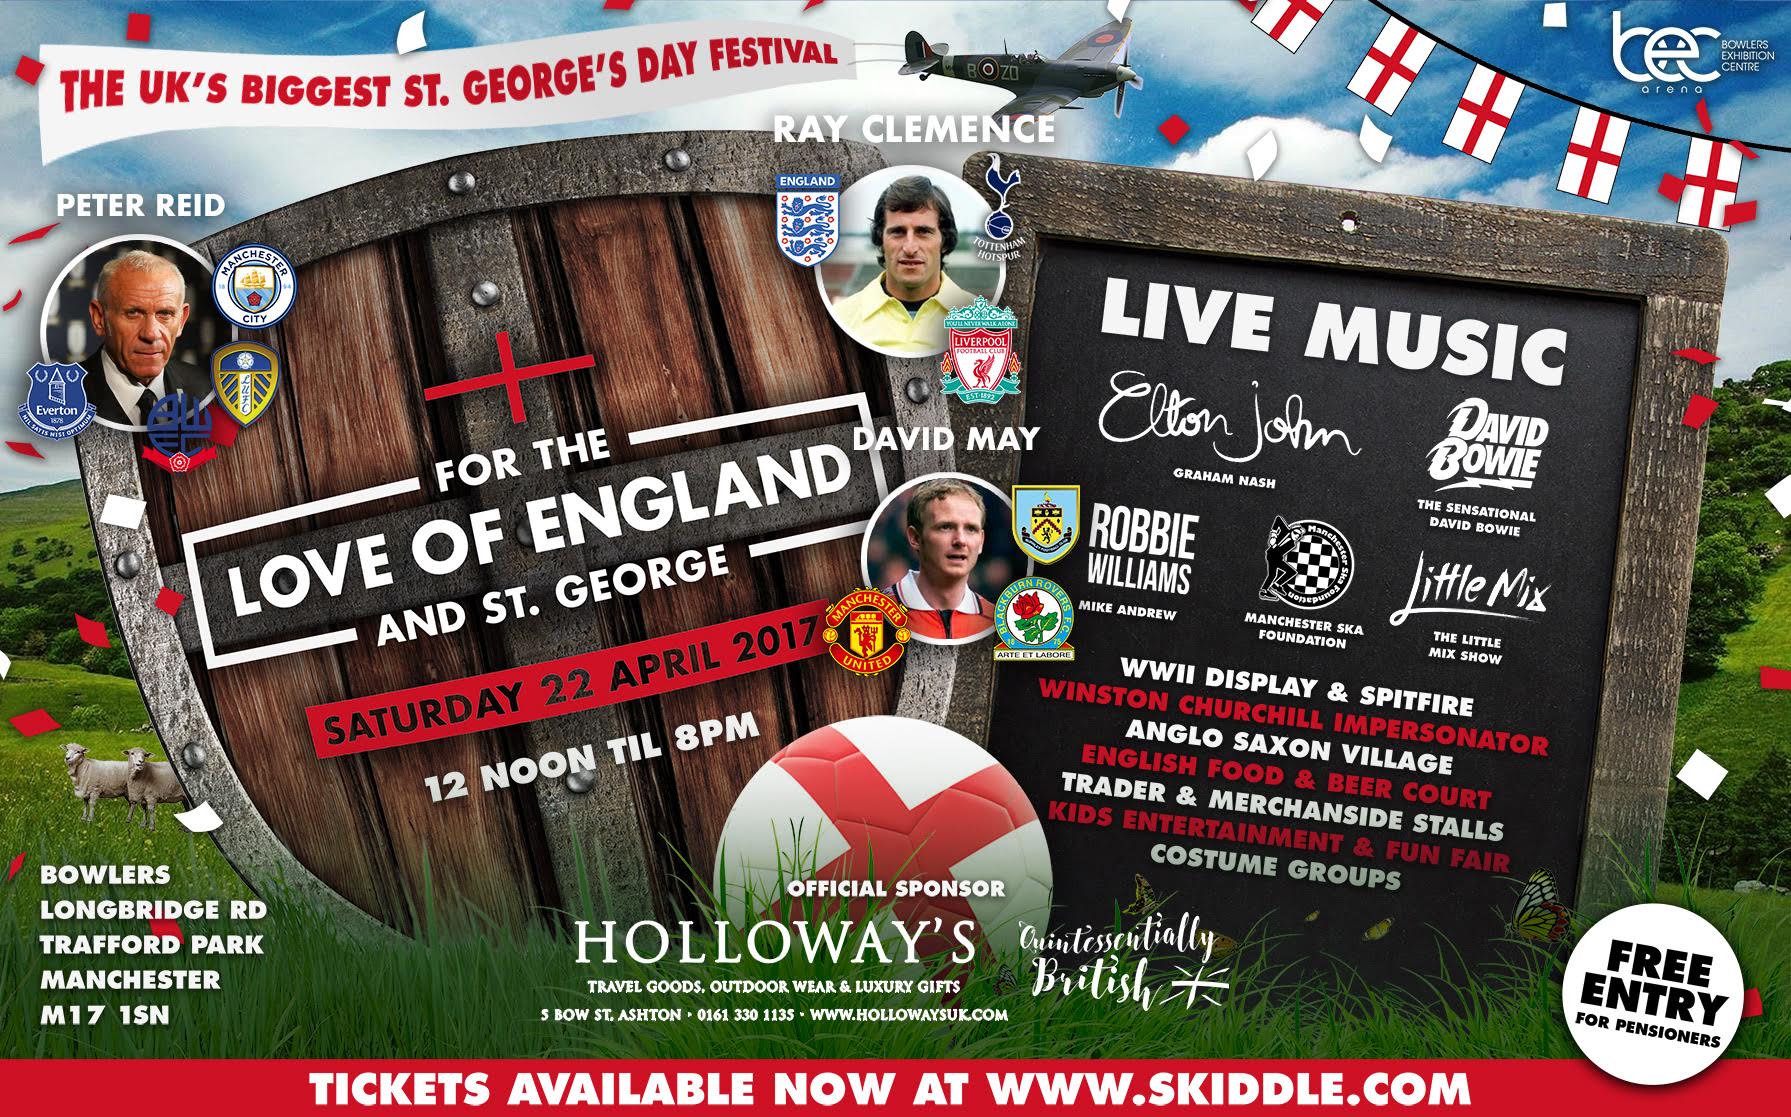 For the Love of England and St. George poster